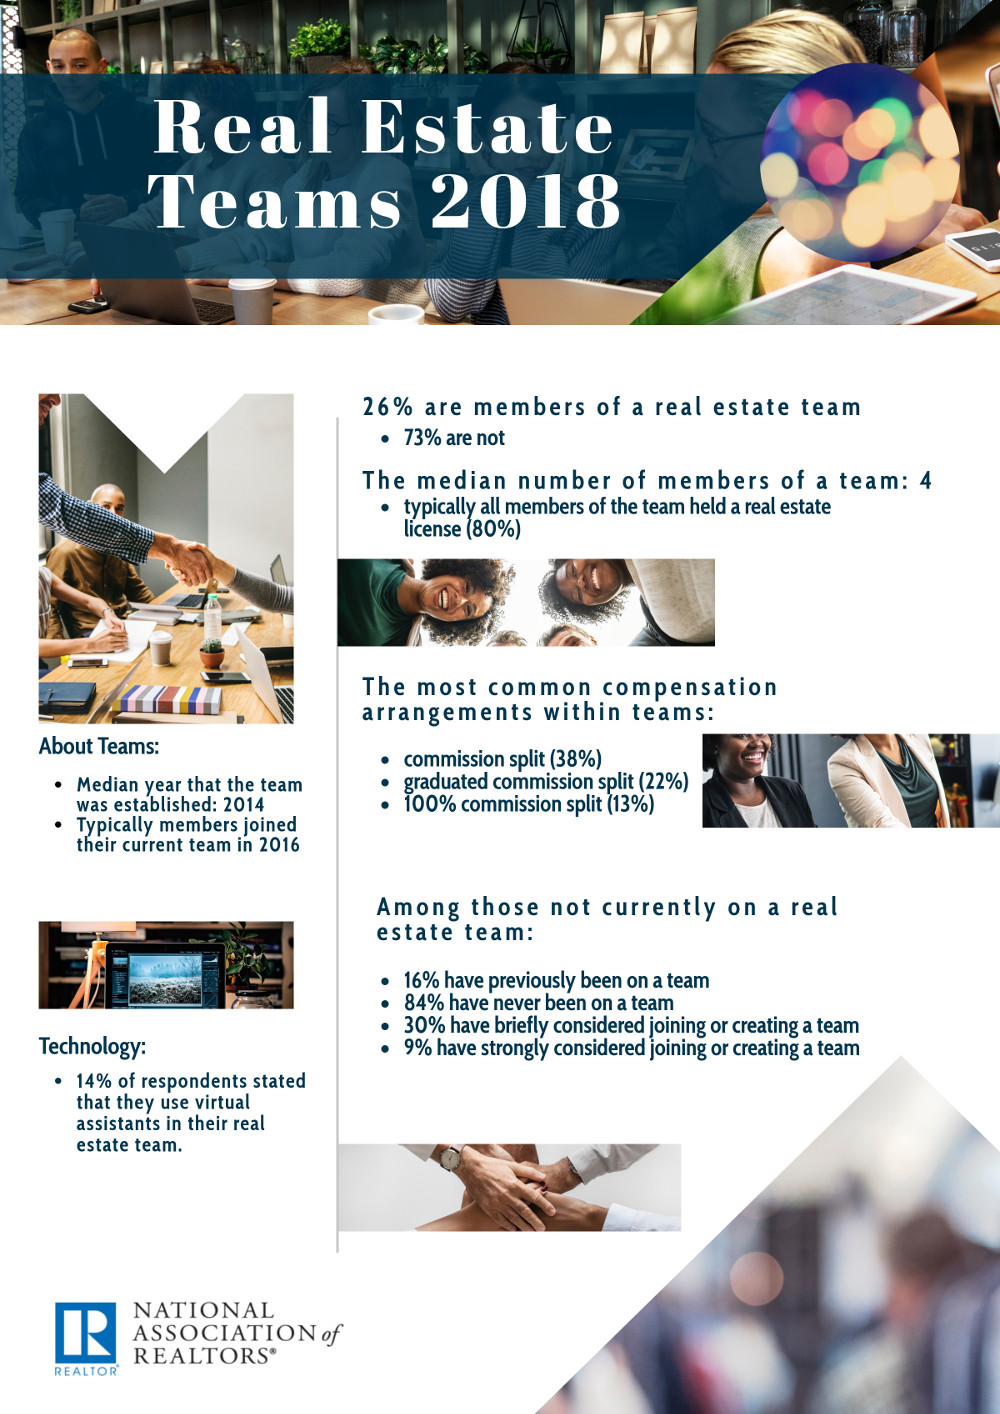 nar 2018 real estate teams infographic